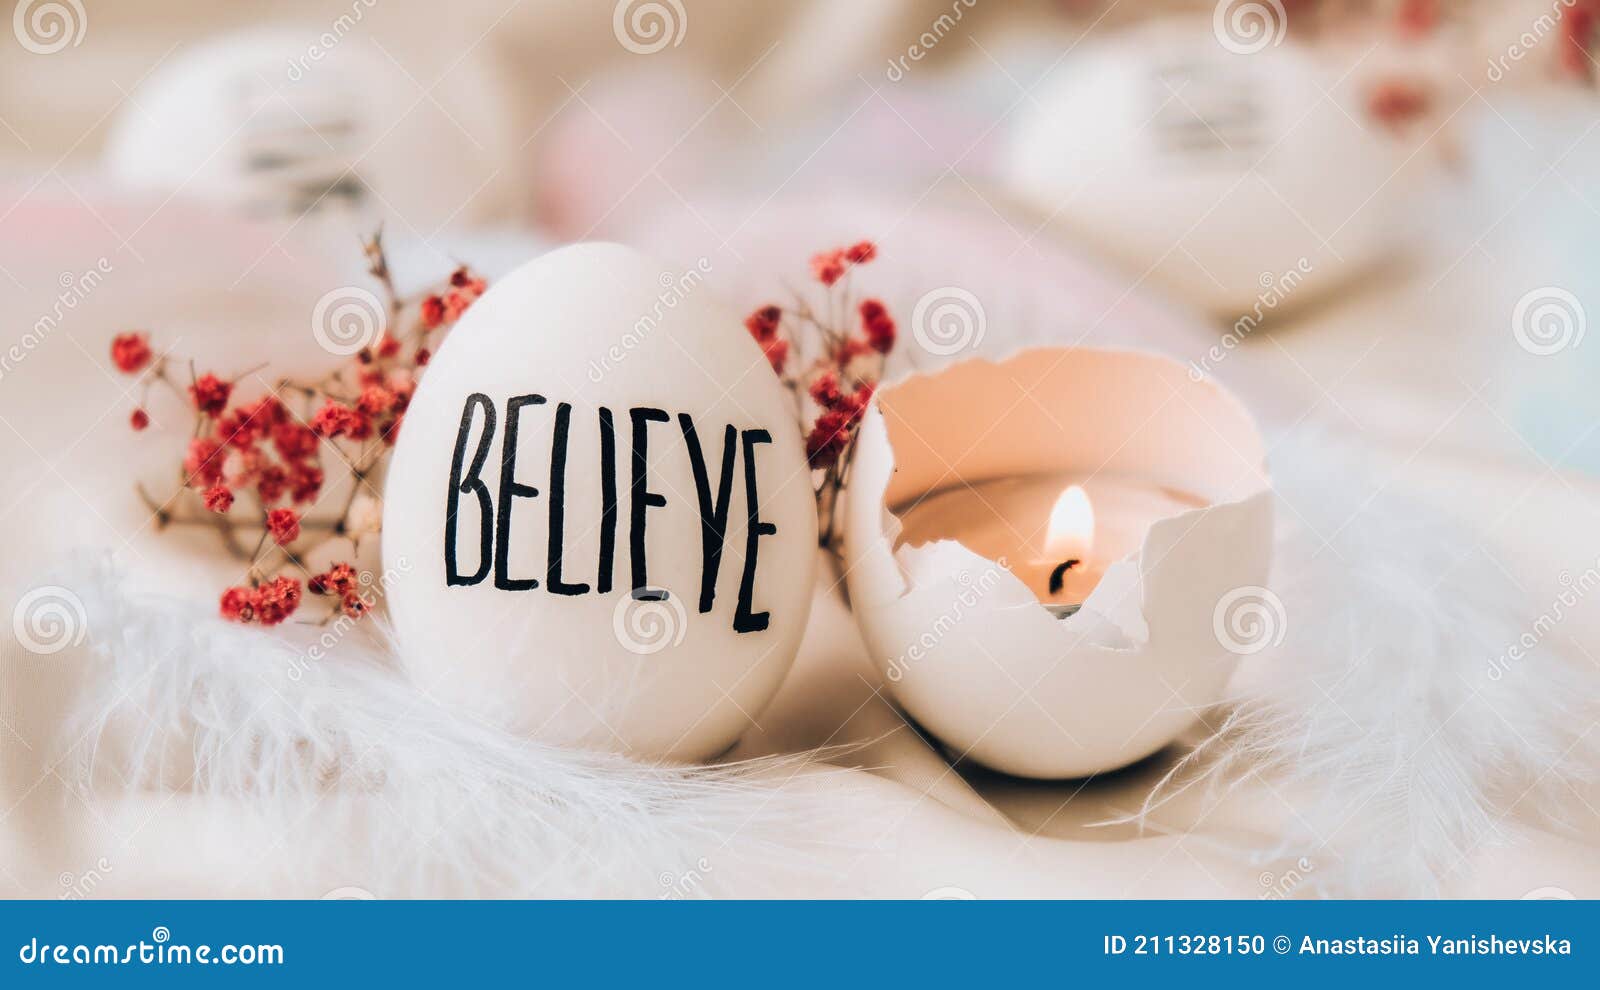 Easter Eggs Composition. Easter Message, Words Drawn with Pen. High Angle View of Shells on Table. Believe. Candle in Egg Shell Stock Photo - Image of minimalism, decoration: 211328150